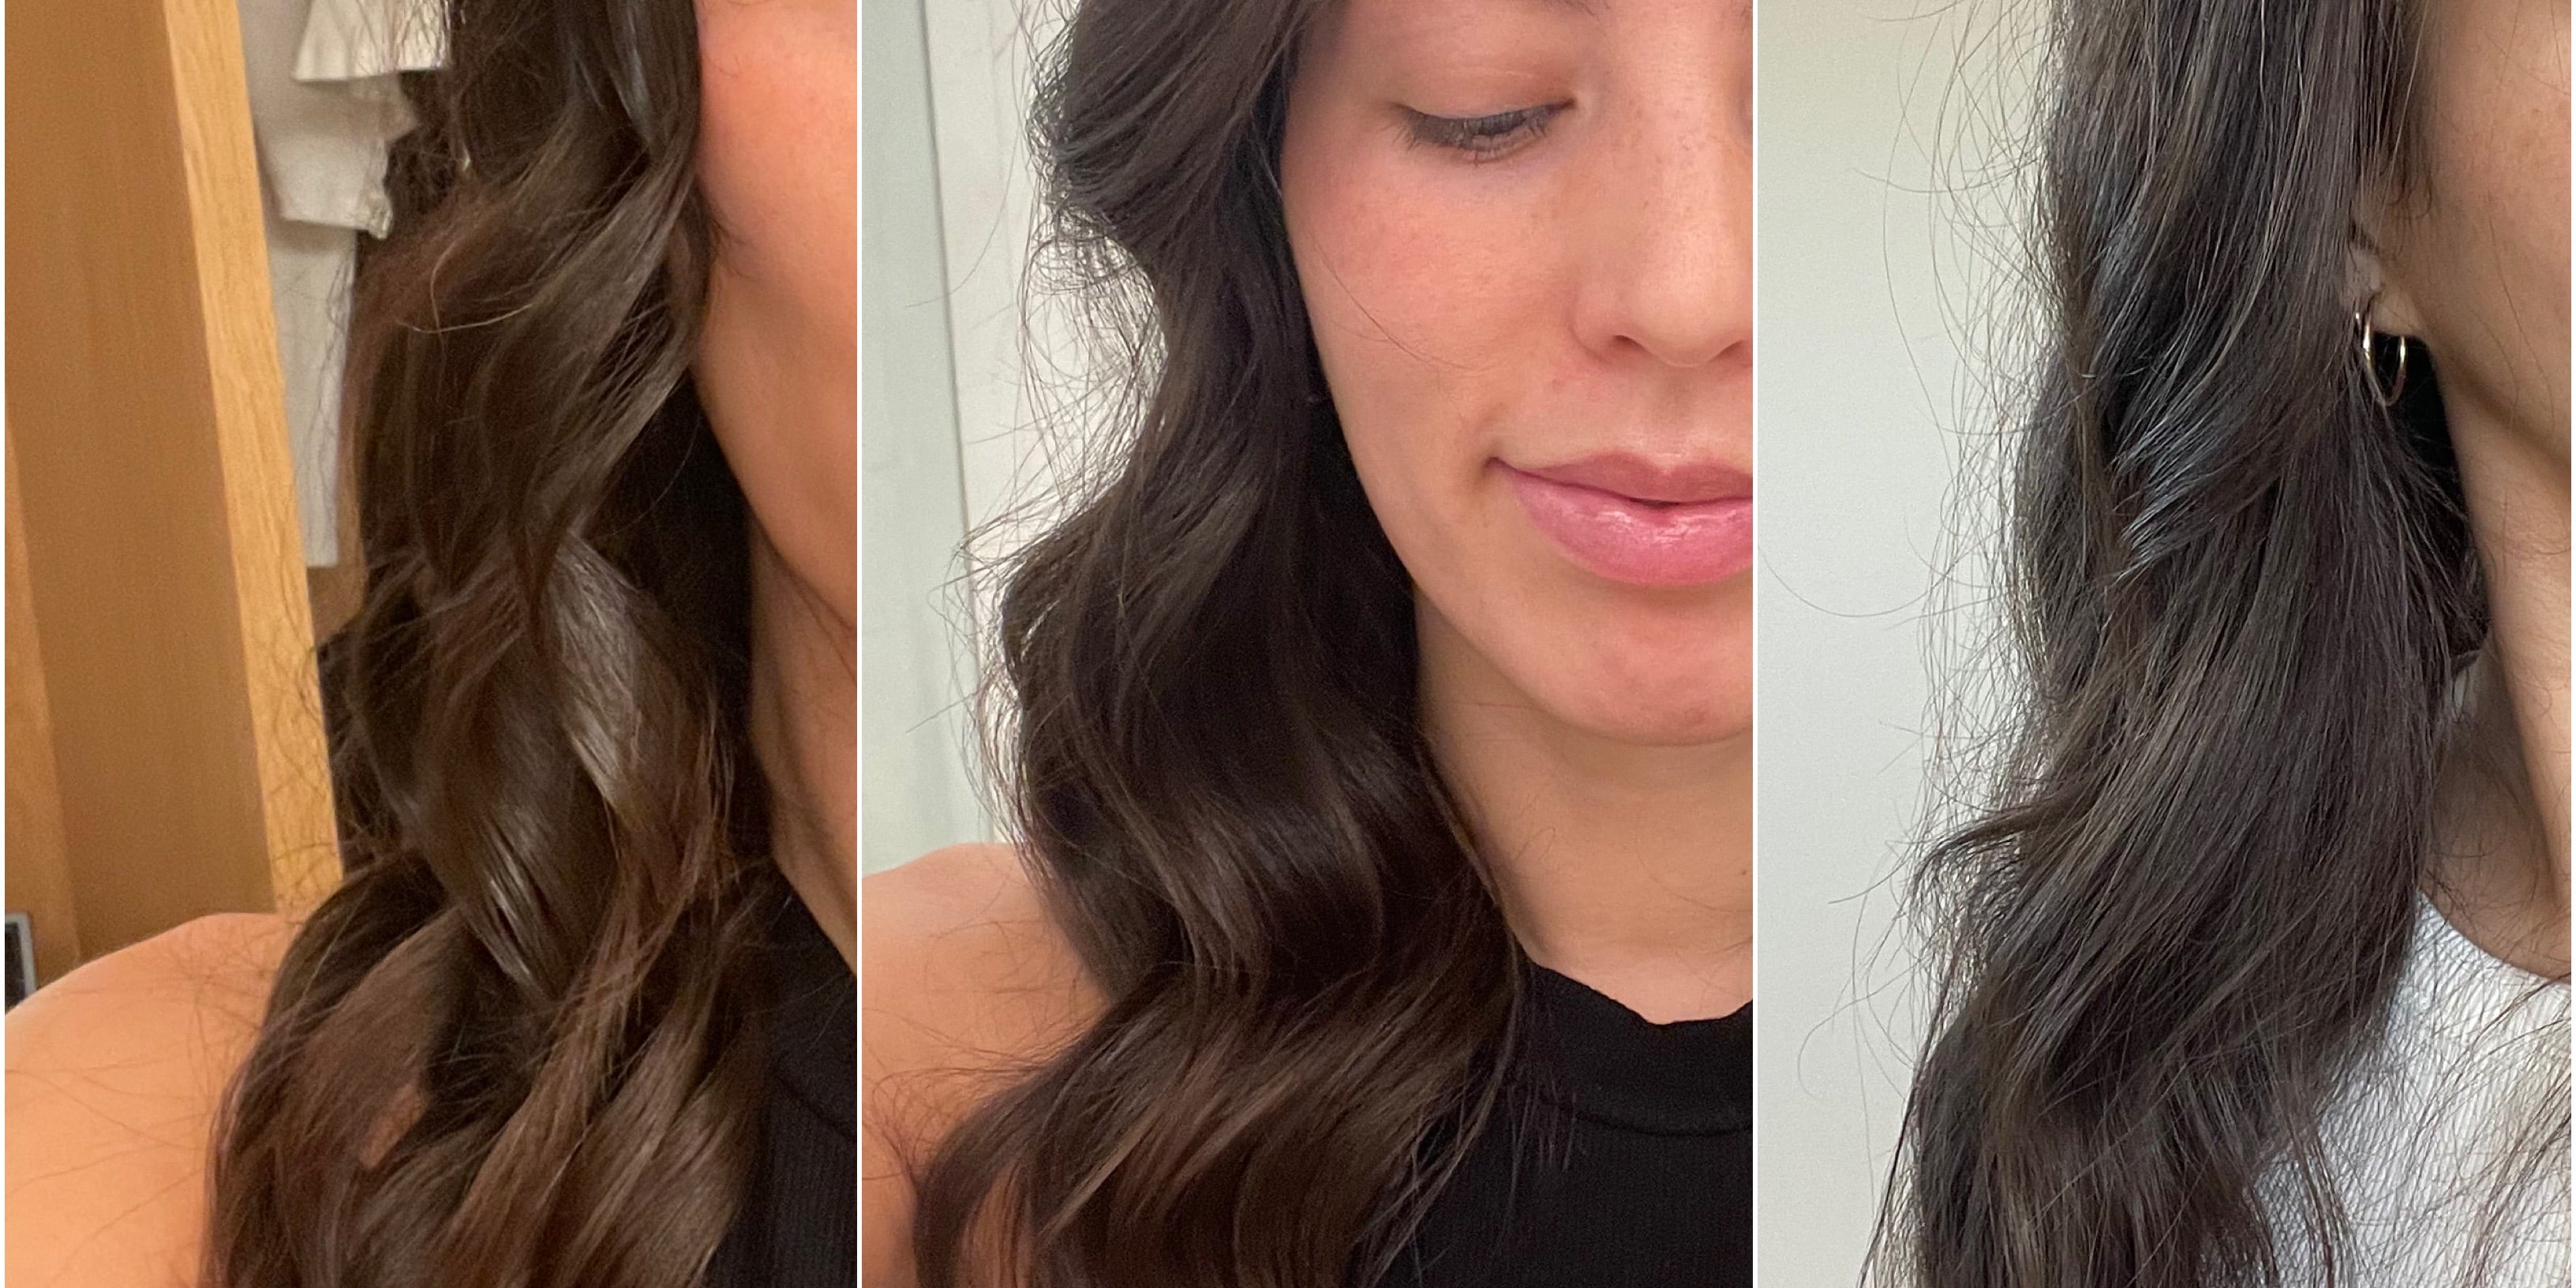 Why Does My Hair Curl at the End? (6 Reasons Why & What To Do